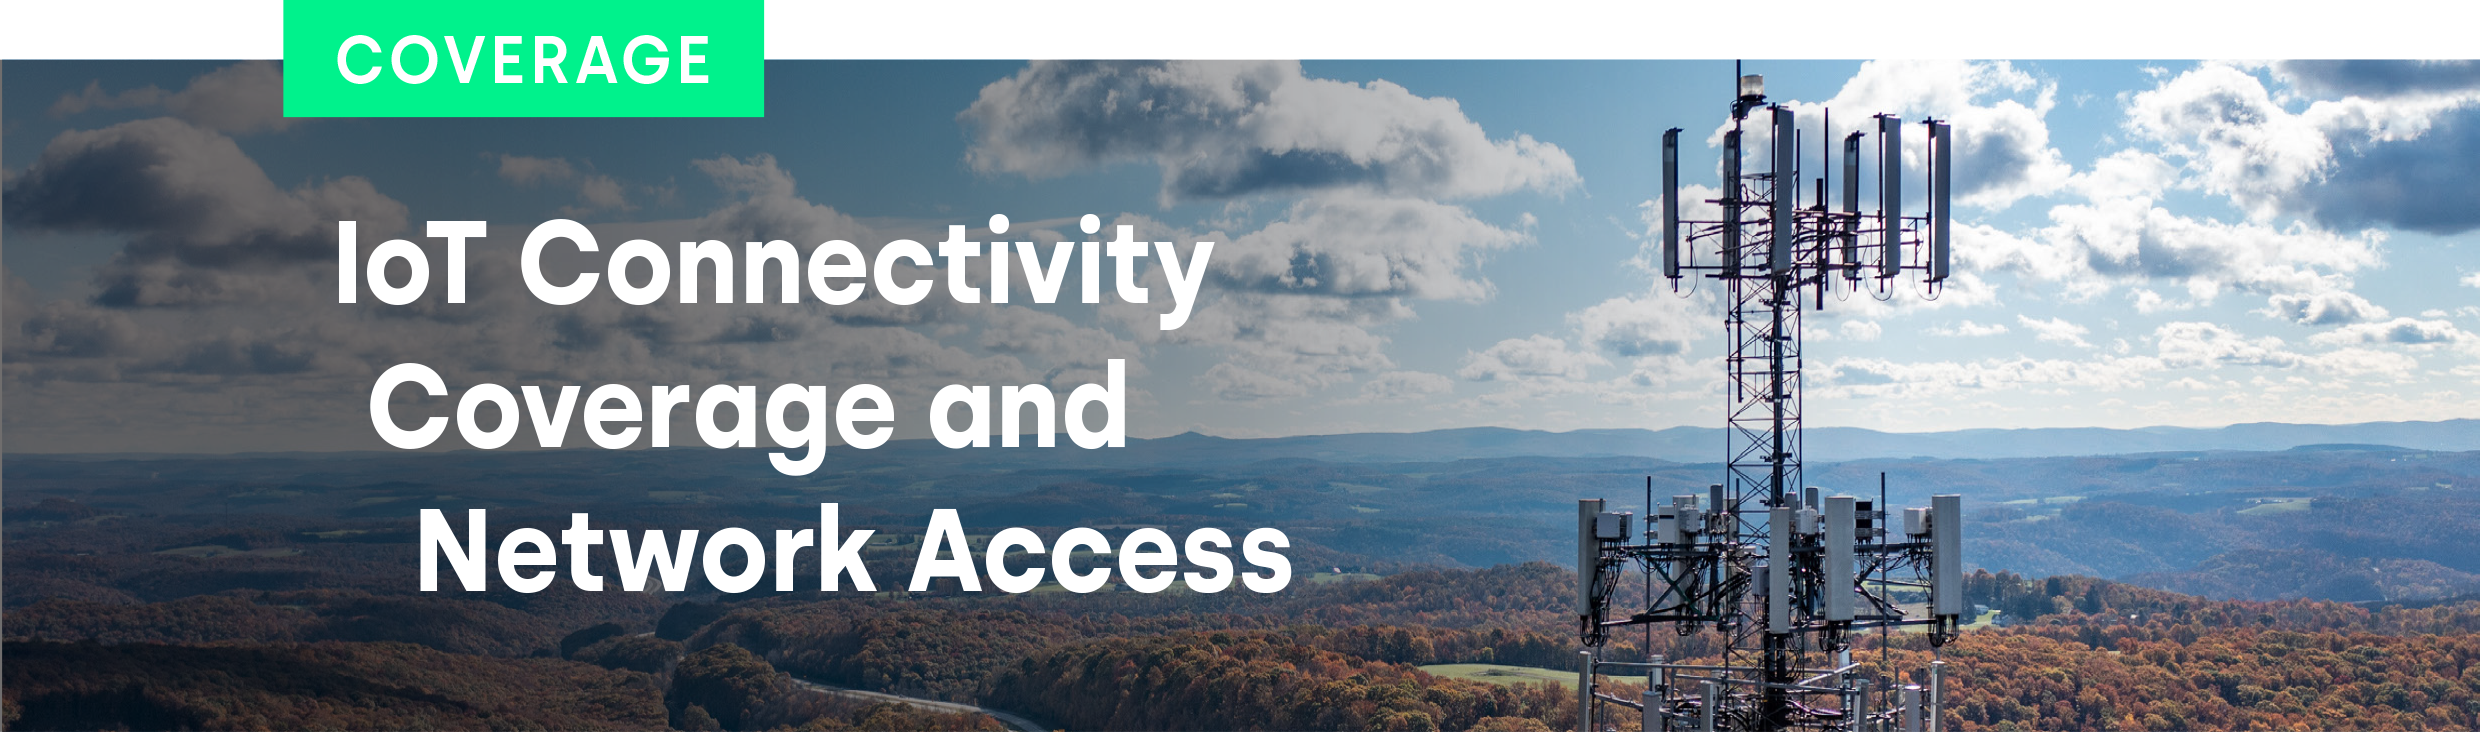 IoT Connectivity Coverage and Network Access